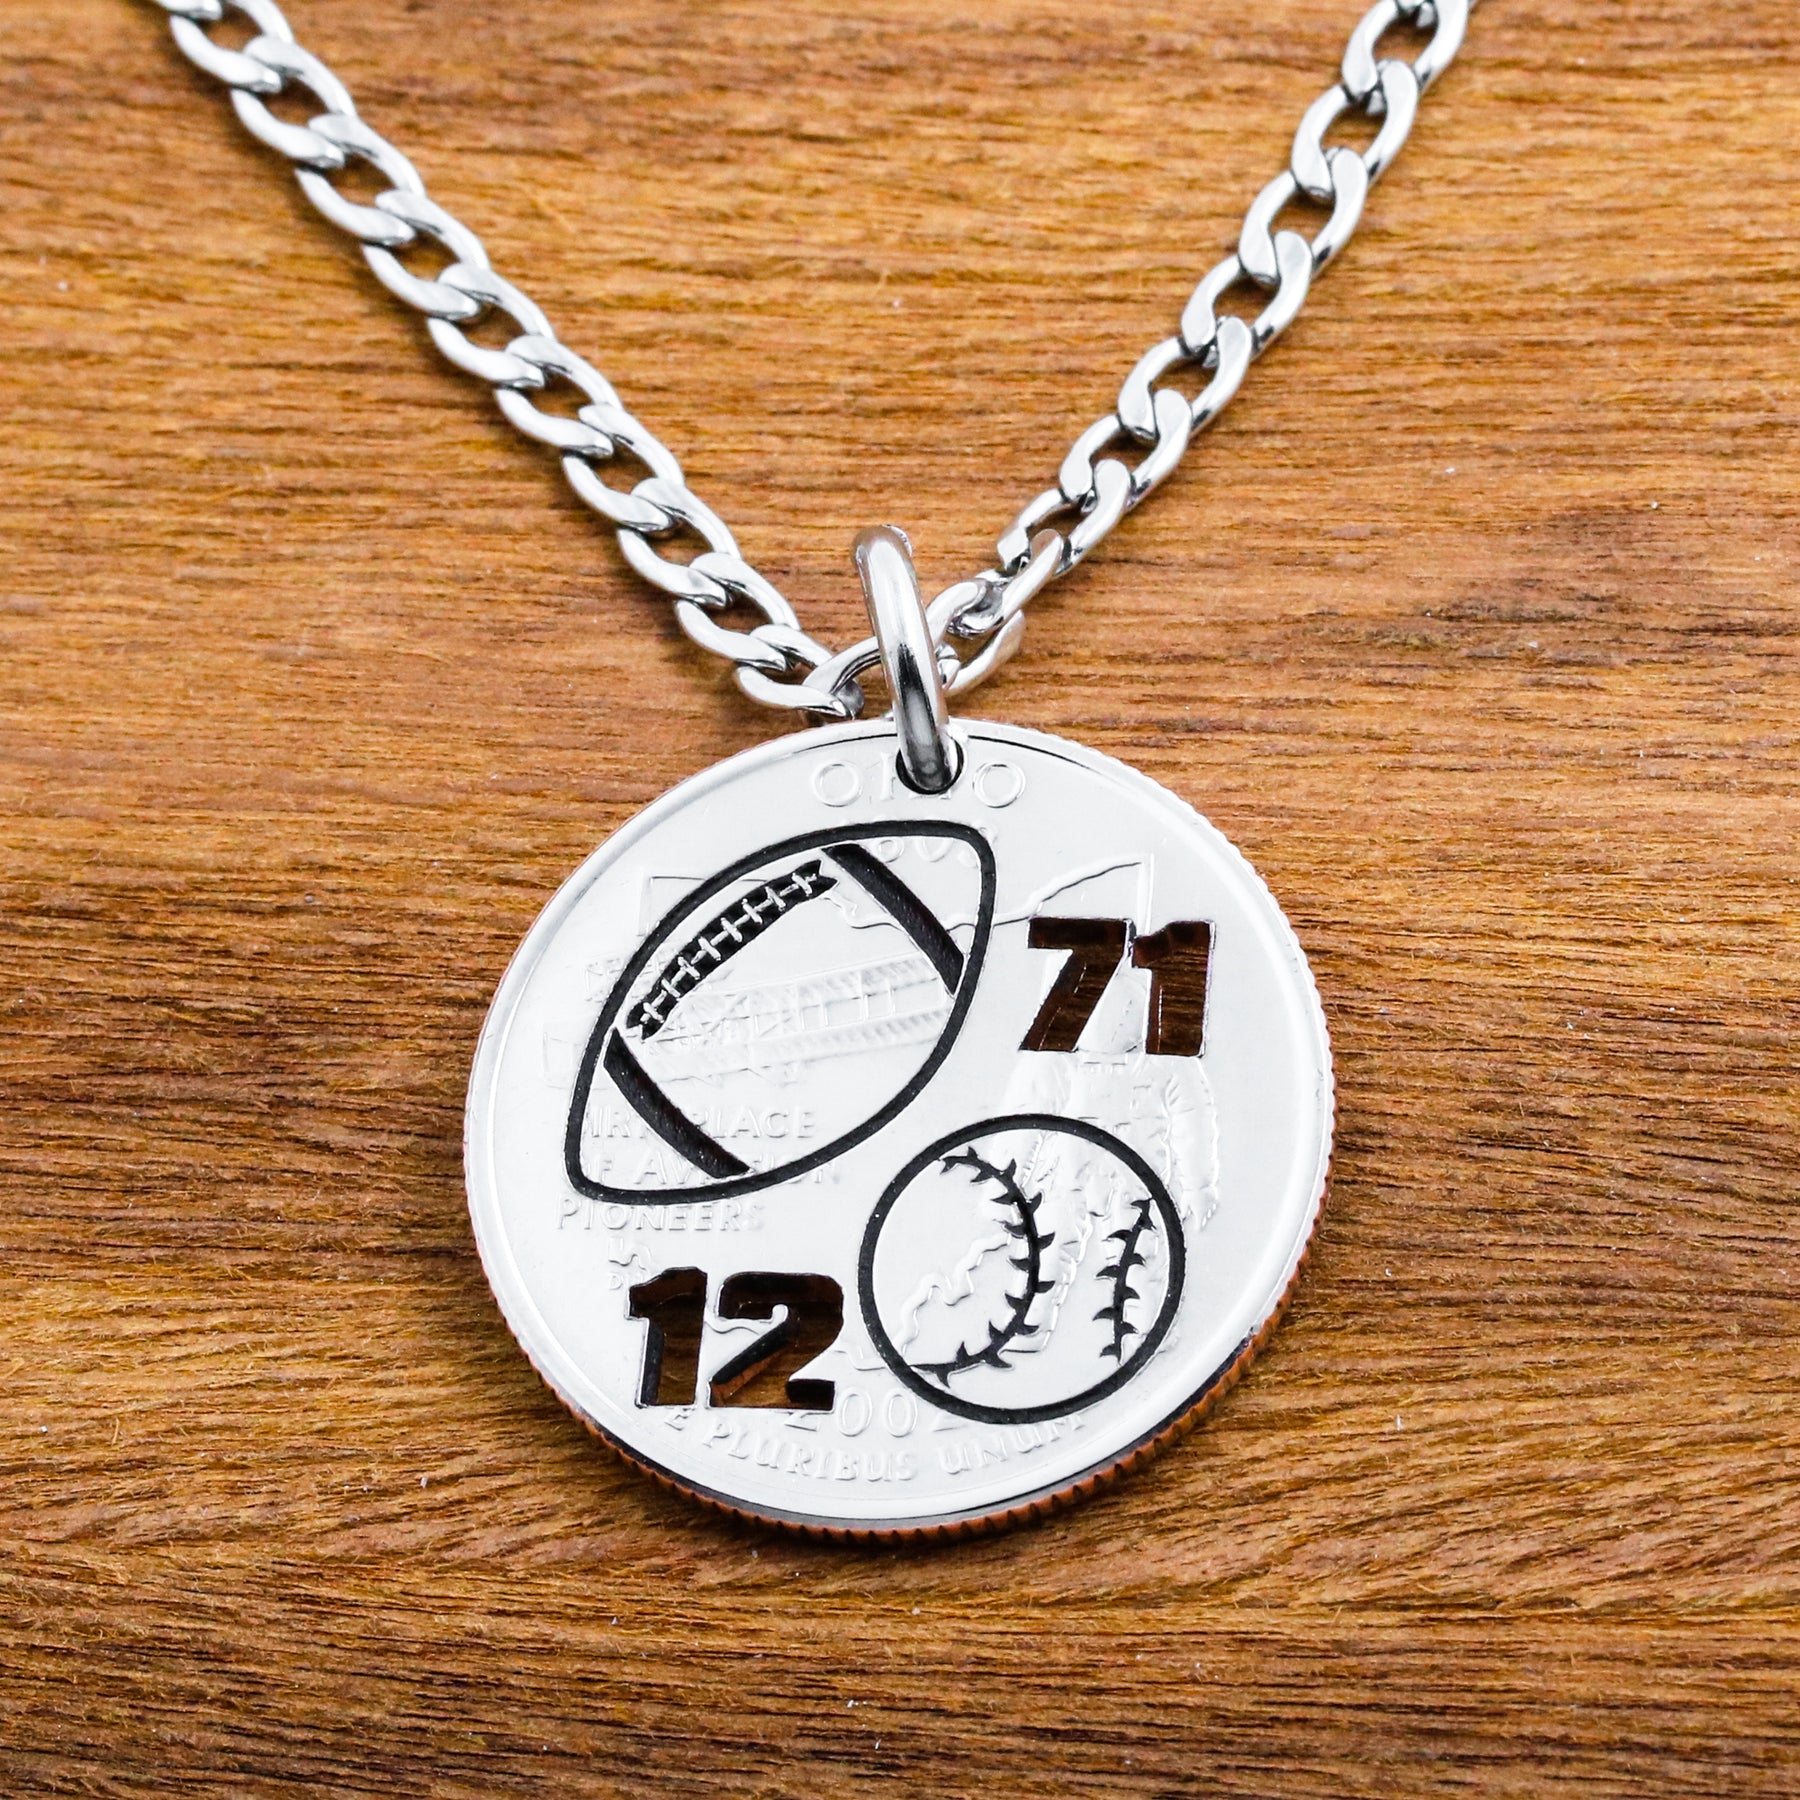 Amazon.com: Certified 10k Gold Personalized Football Player Sports Necklace  with Your Name and Number, 16